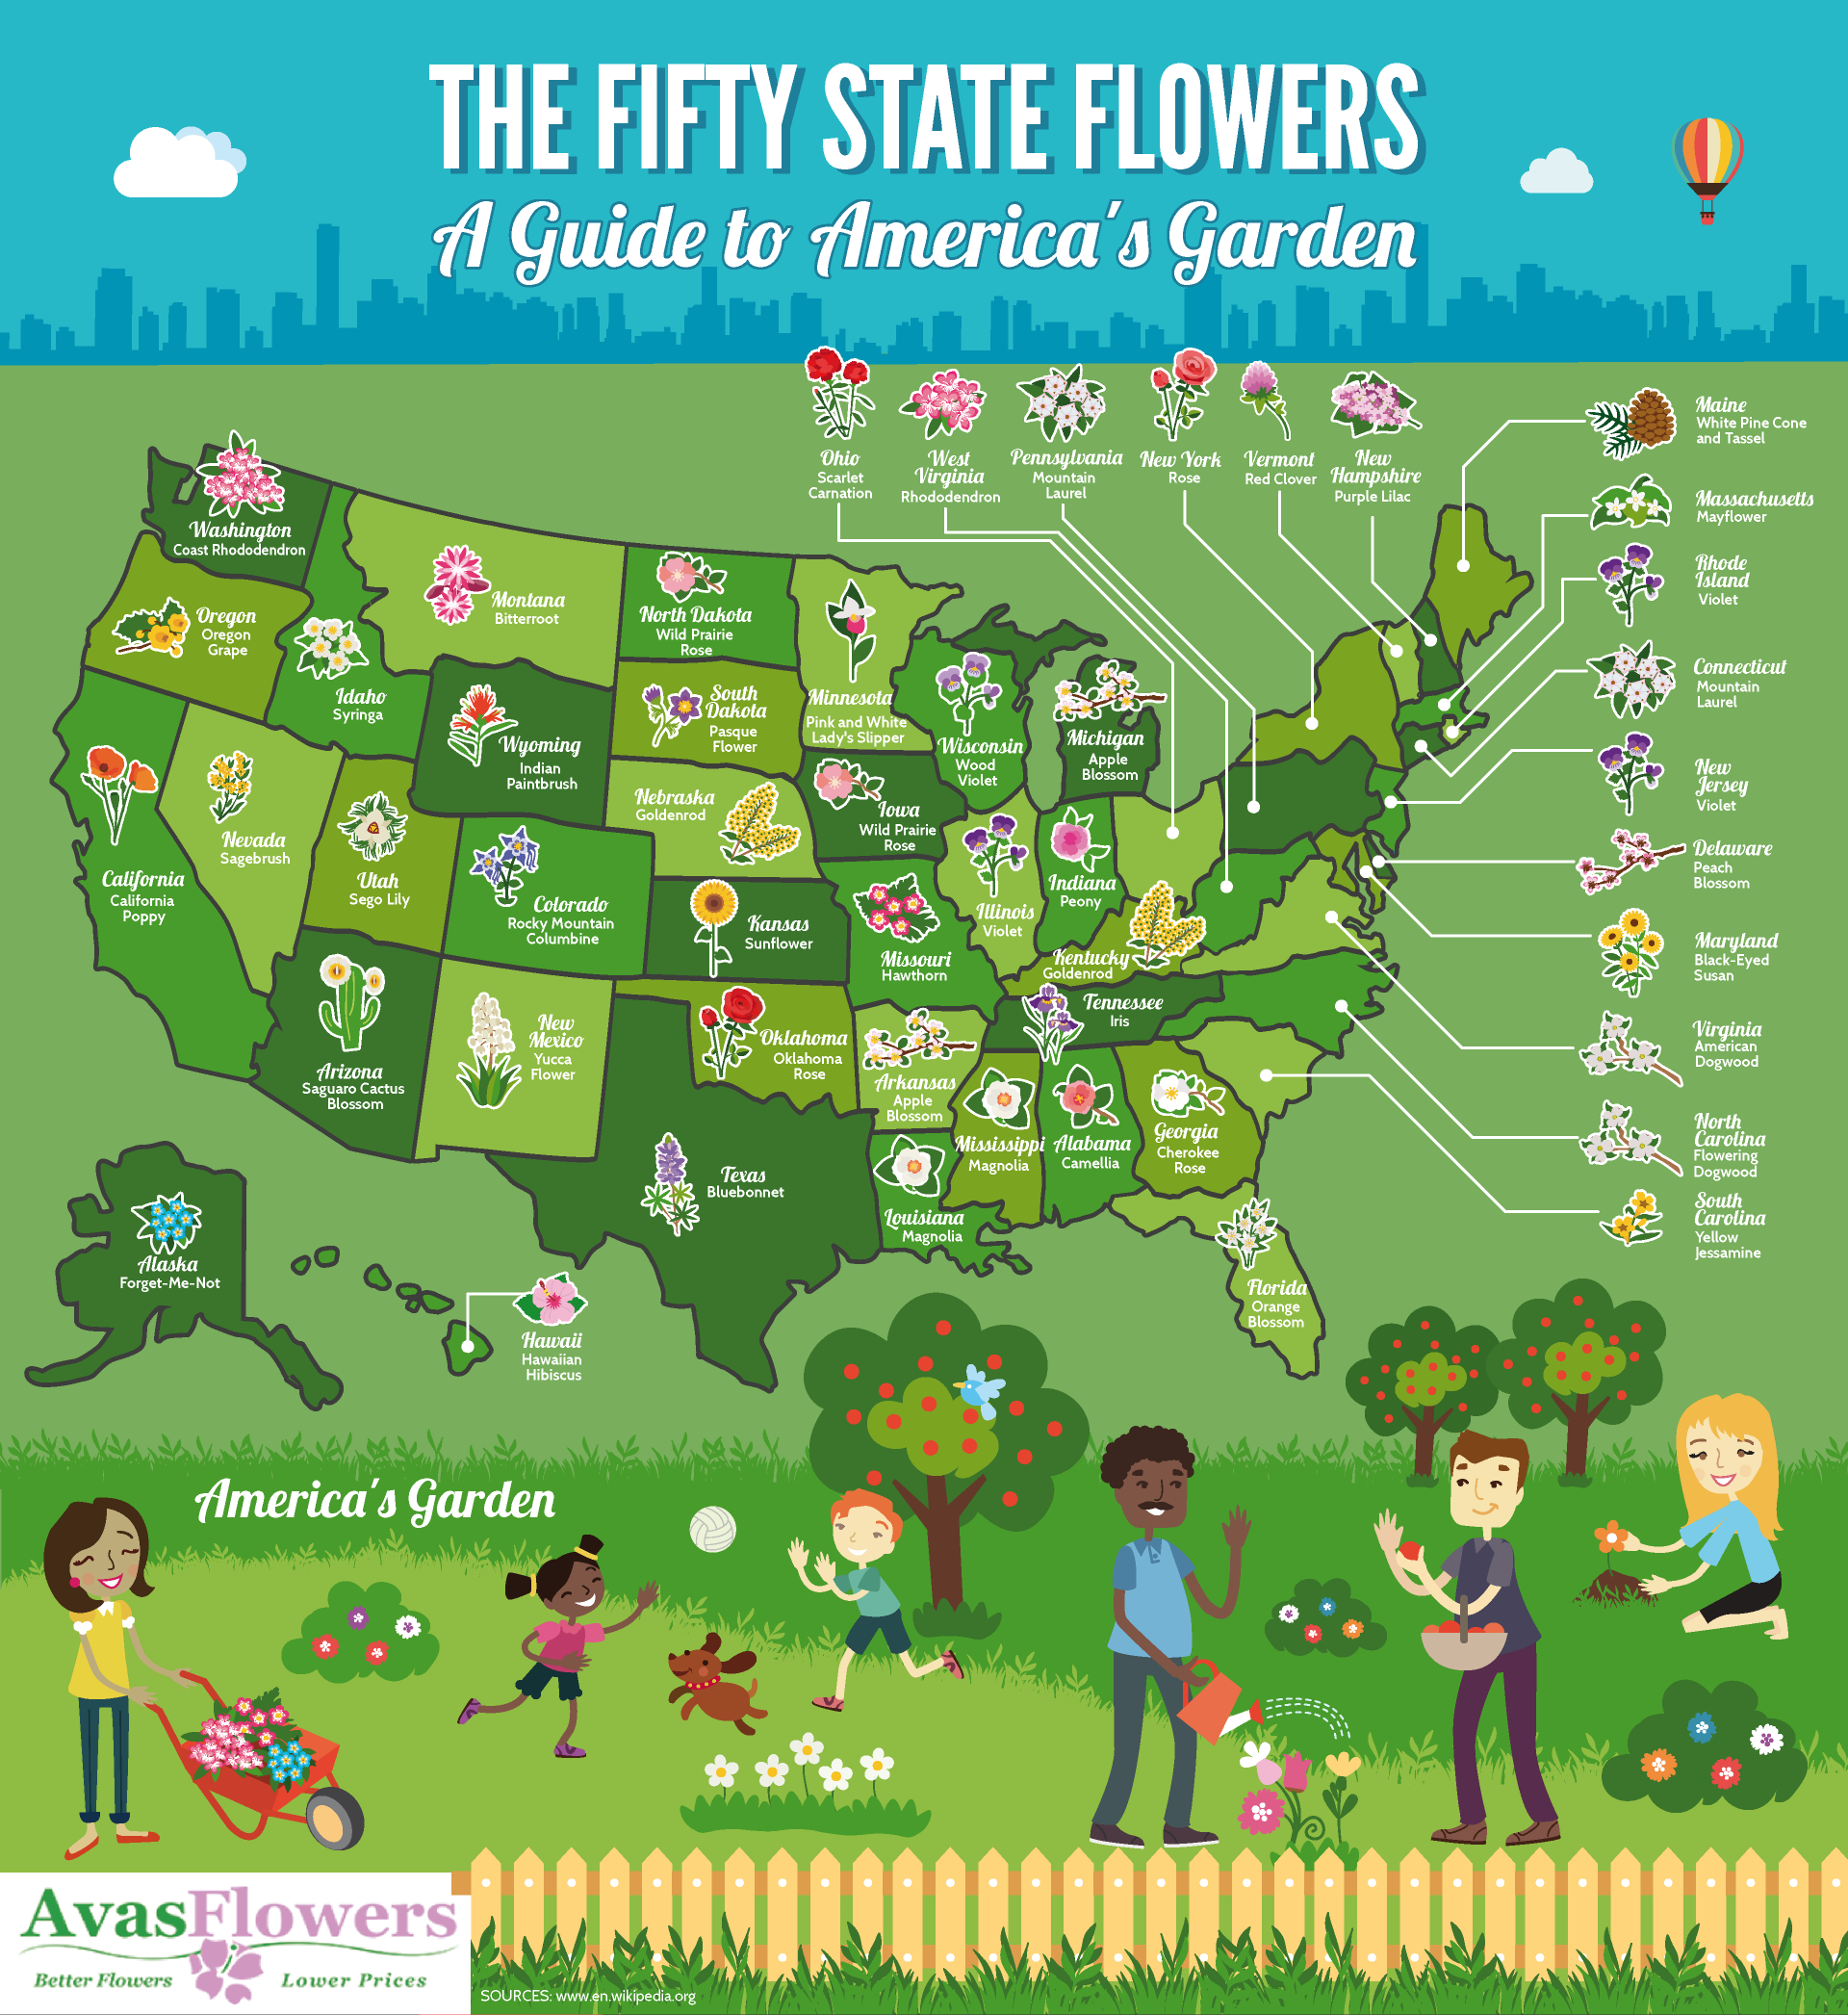 The Fifty State Flowers: A Guide to America's Garden